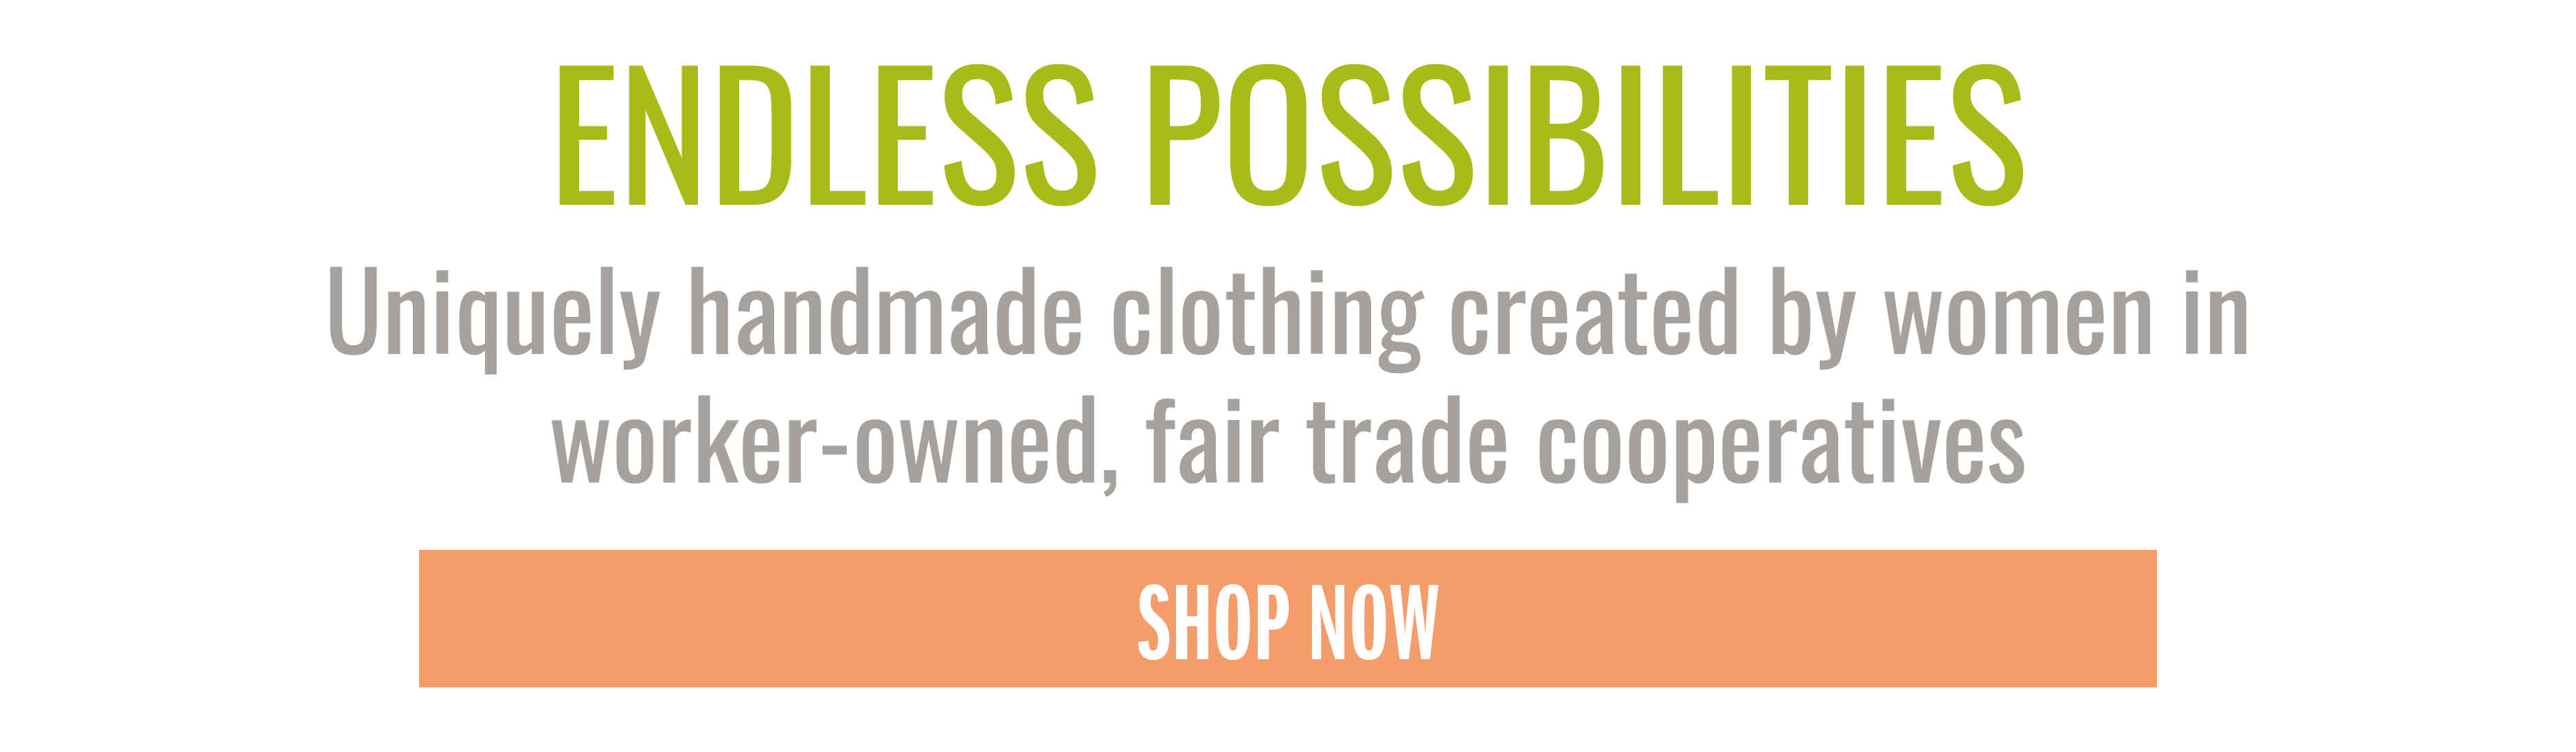 ENDLESS POSSIBILITIES Uniquely handmade clothing created by women in worker-owned, fair trade cooperatives SHOP NOW